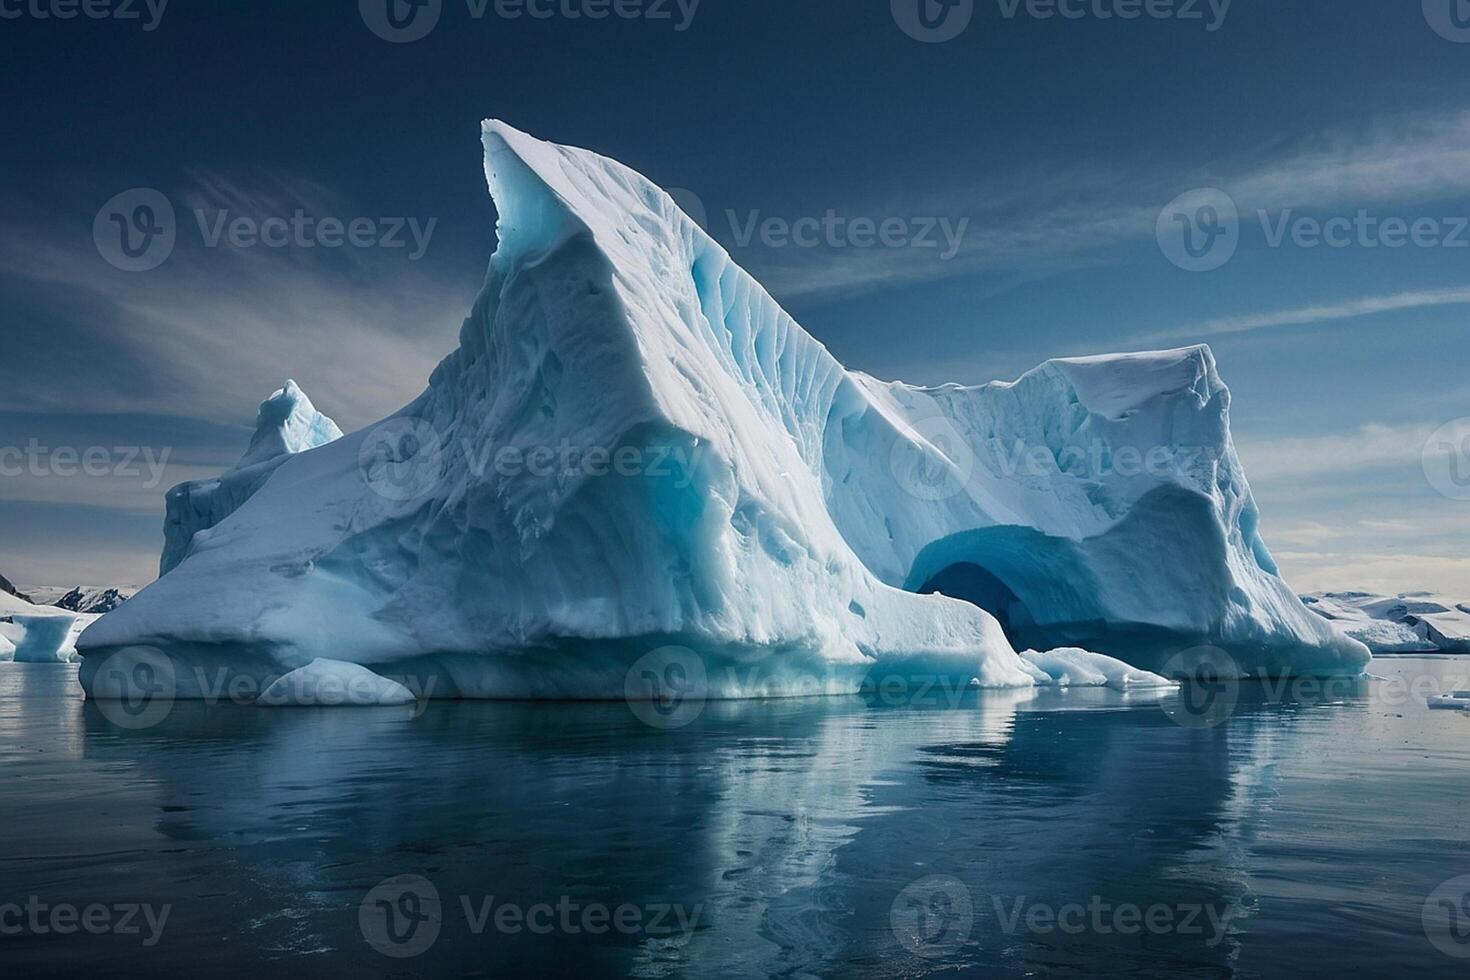 icebergs in the water with a cloudy sky photo